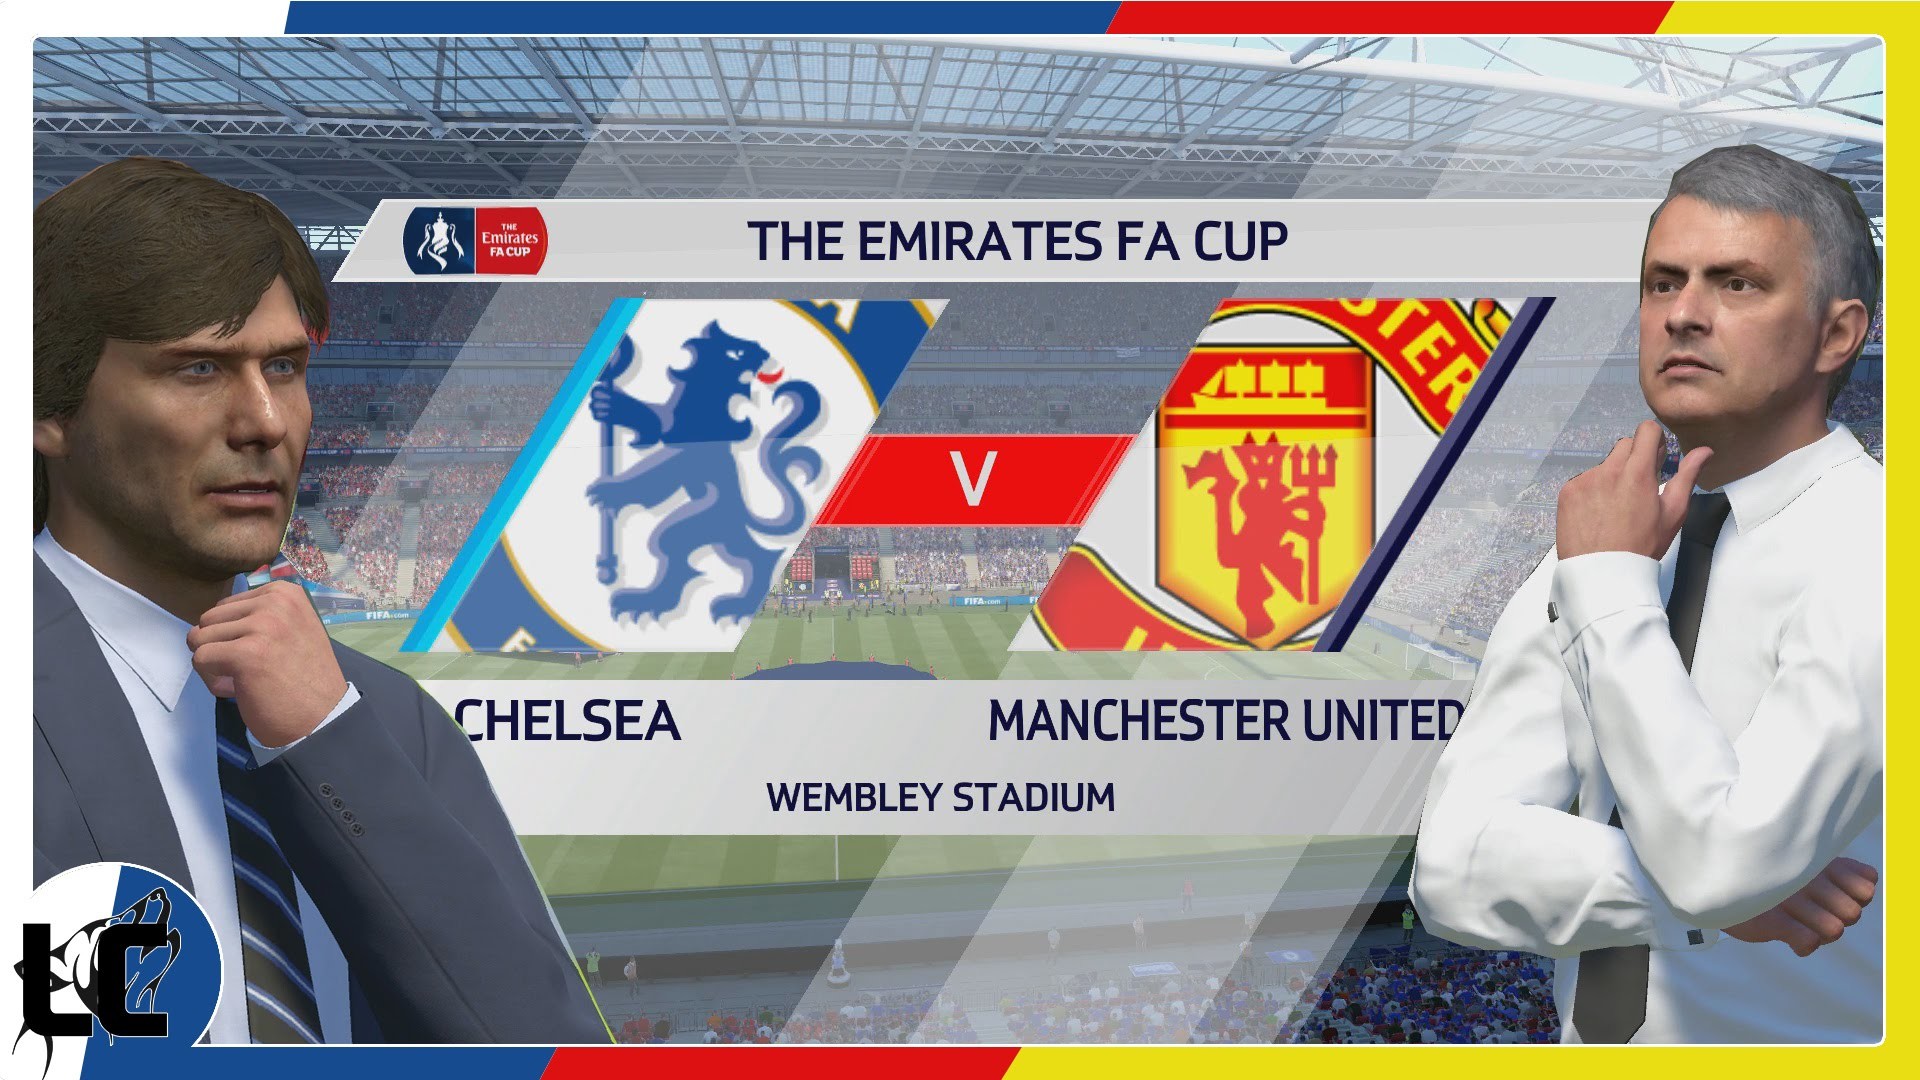 1920x1080 The Emirates FA Cup Final | Chelsea Vs. Manchester United | FIFA 17 -  YouTube